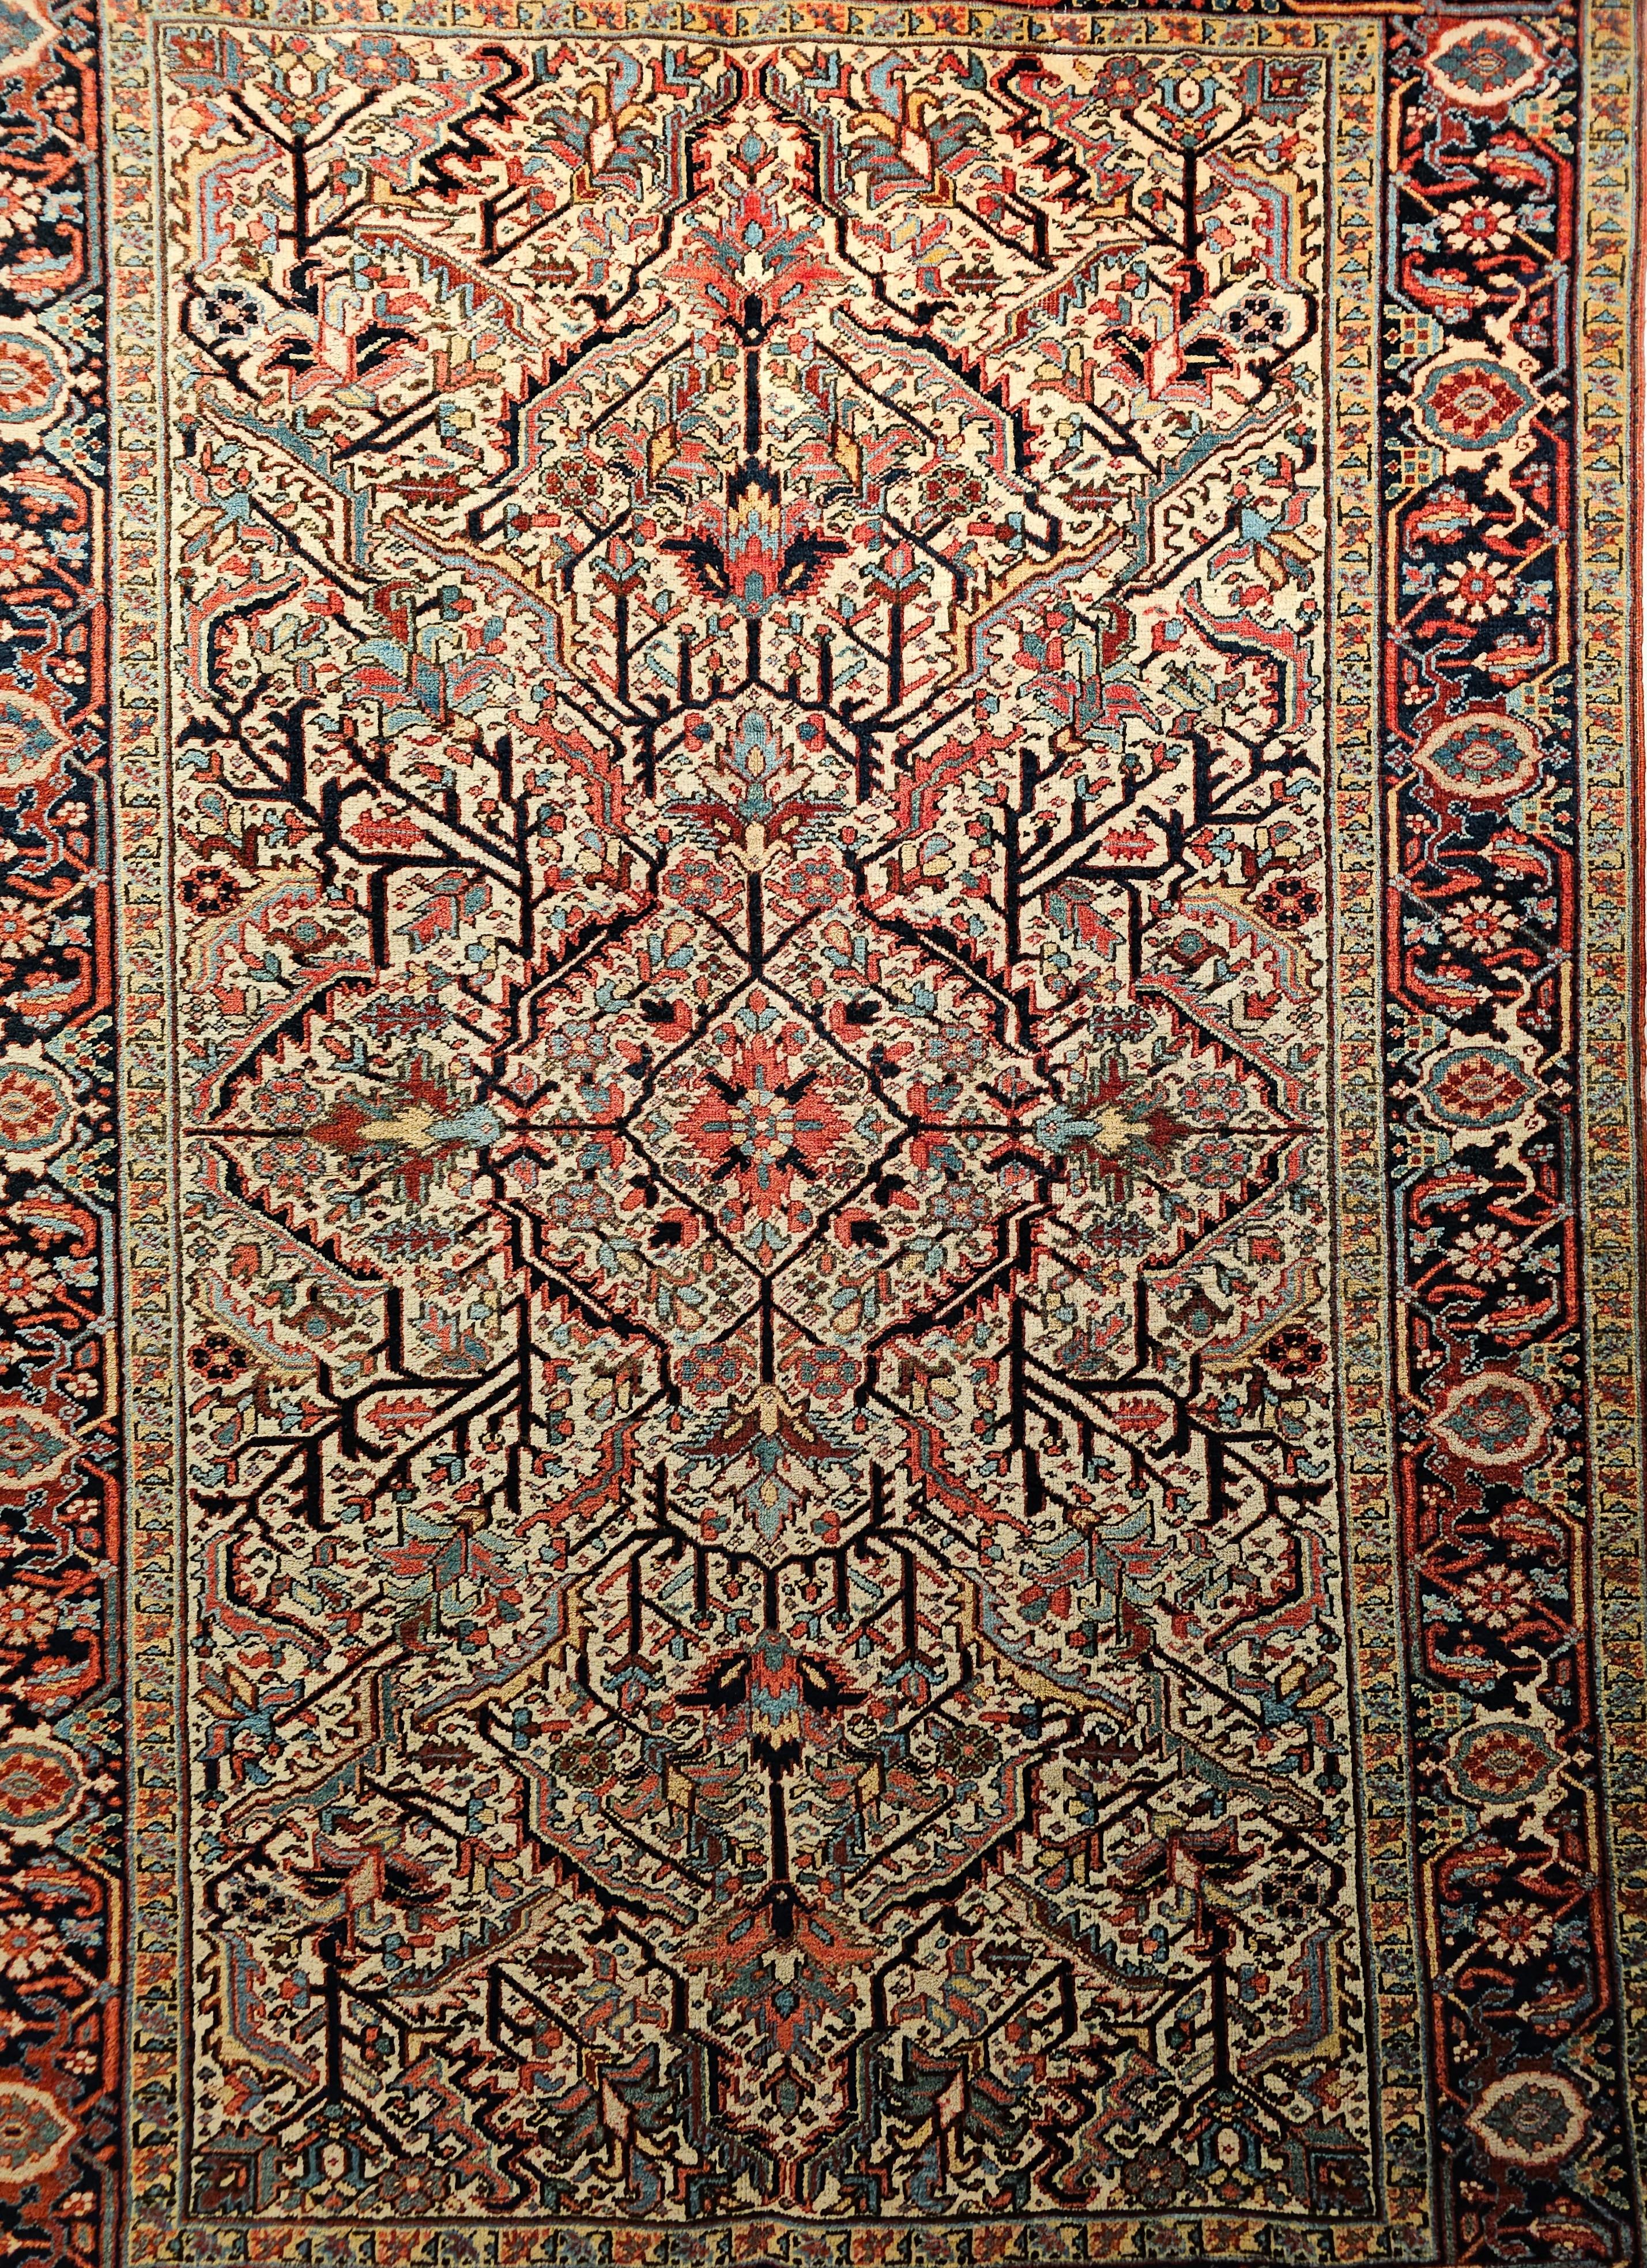 A vintage Persian Heriz Serapi with an allover “Tree of Life” design on a pale yellow field. This beautiful Heriz rug was woven in a village in the Azerbaijan district of NW Persia in the first quarter of the 1900s. It has a few very unique and